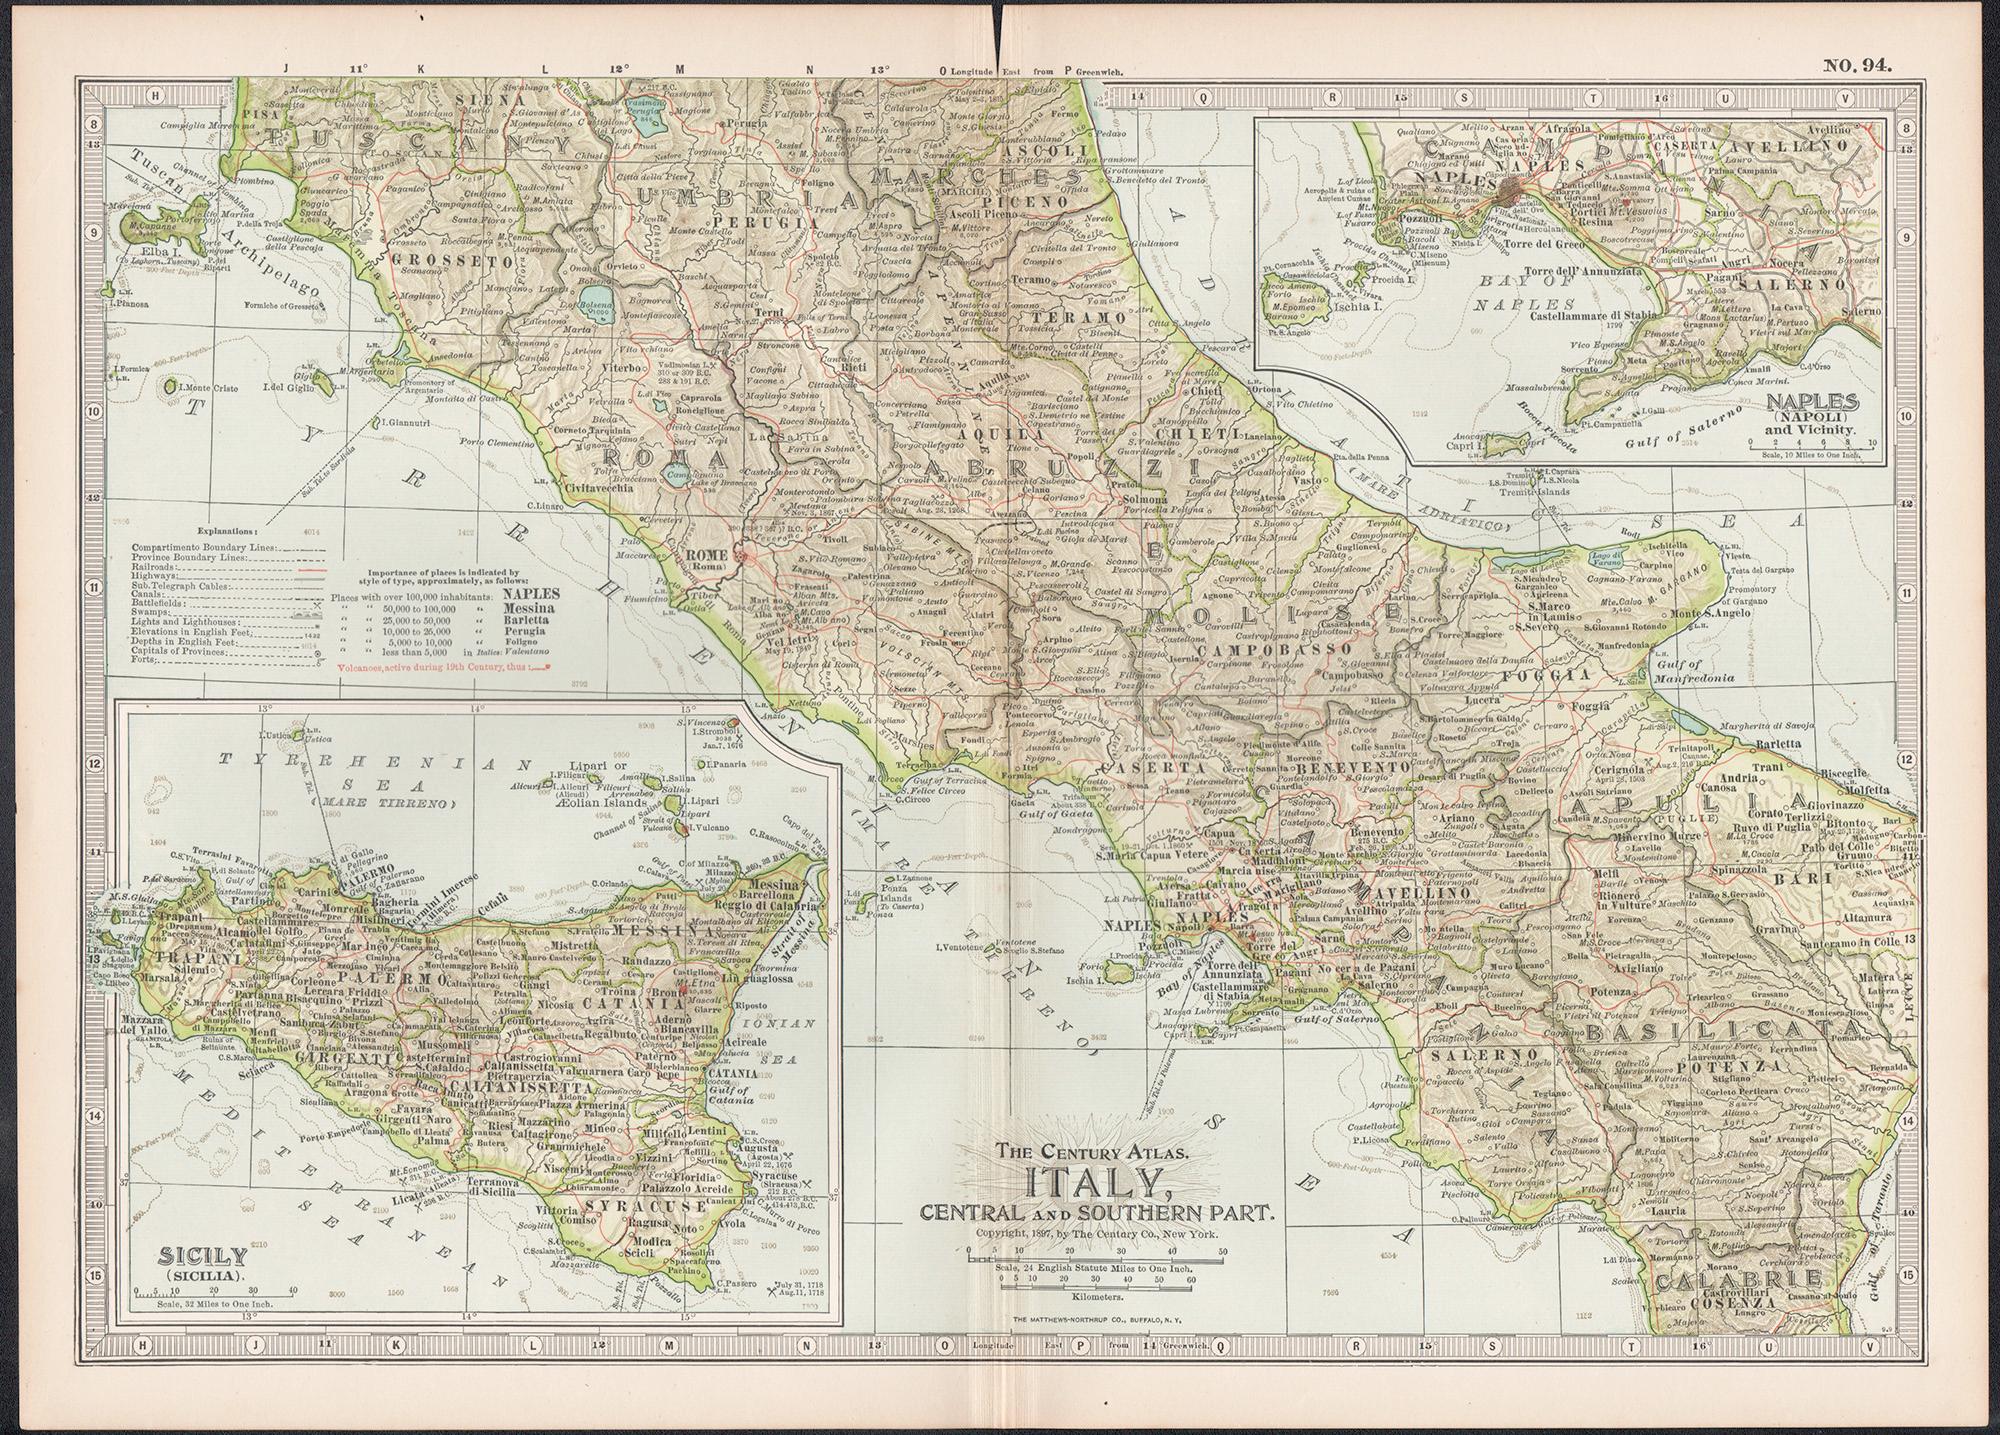 Italy, Central and Southern Part. Century Atlas antique map - Print by Unknown